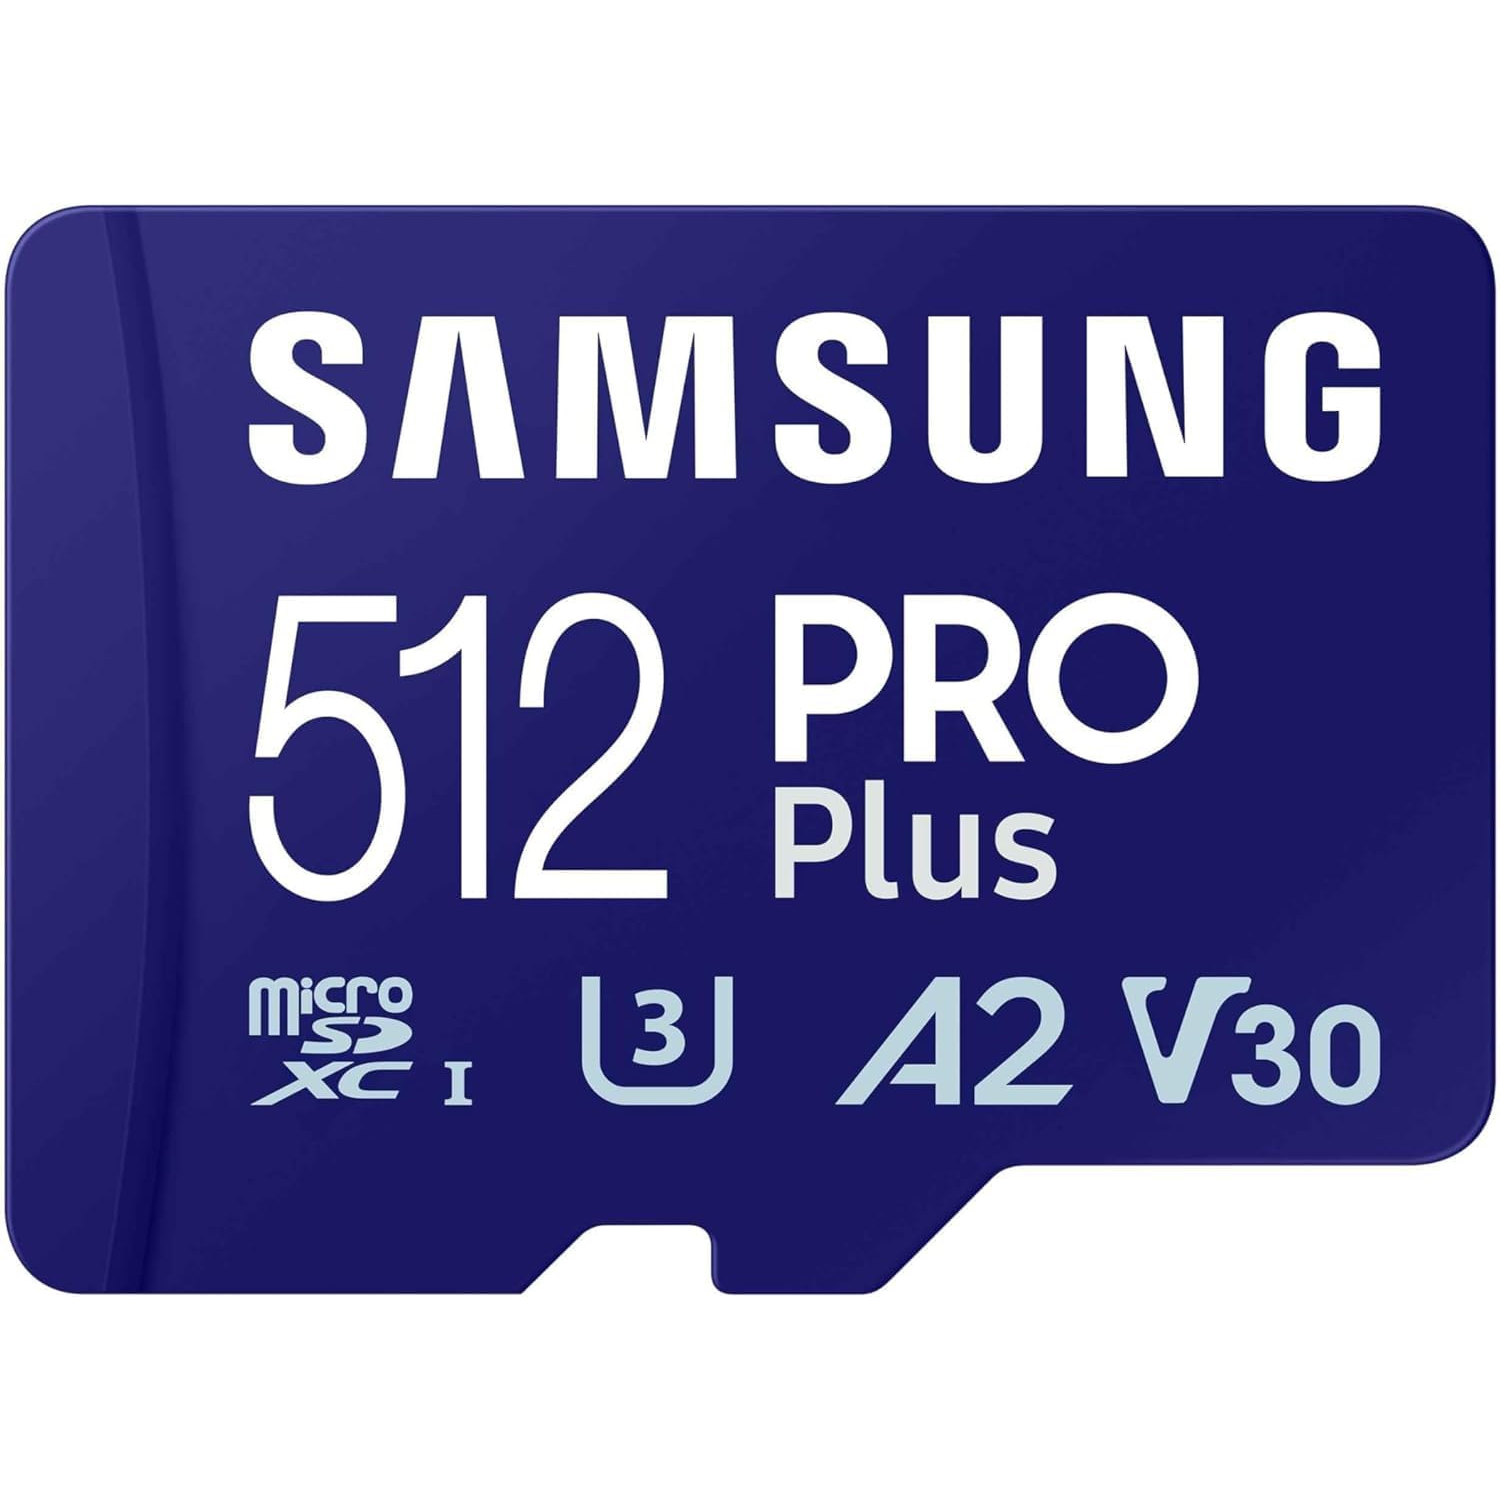 Samsung PRO Plus microSD Card + SD Adapter 512GB for Mobile Gaming on Smartphones, Tablets and Handheld Consoles, UHS-I U3, Full HD & 4K UHD, 180MB/s Read, 130MB/s Write